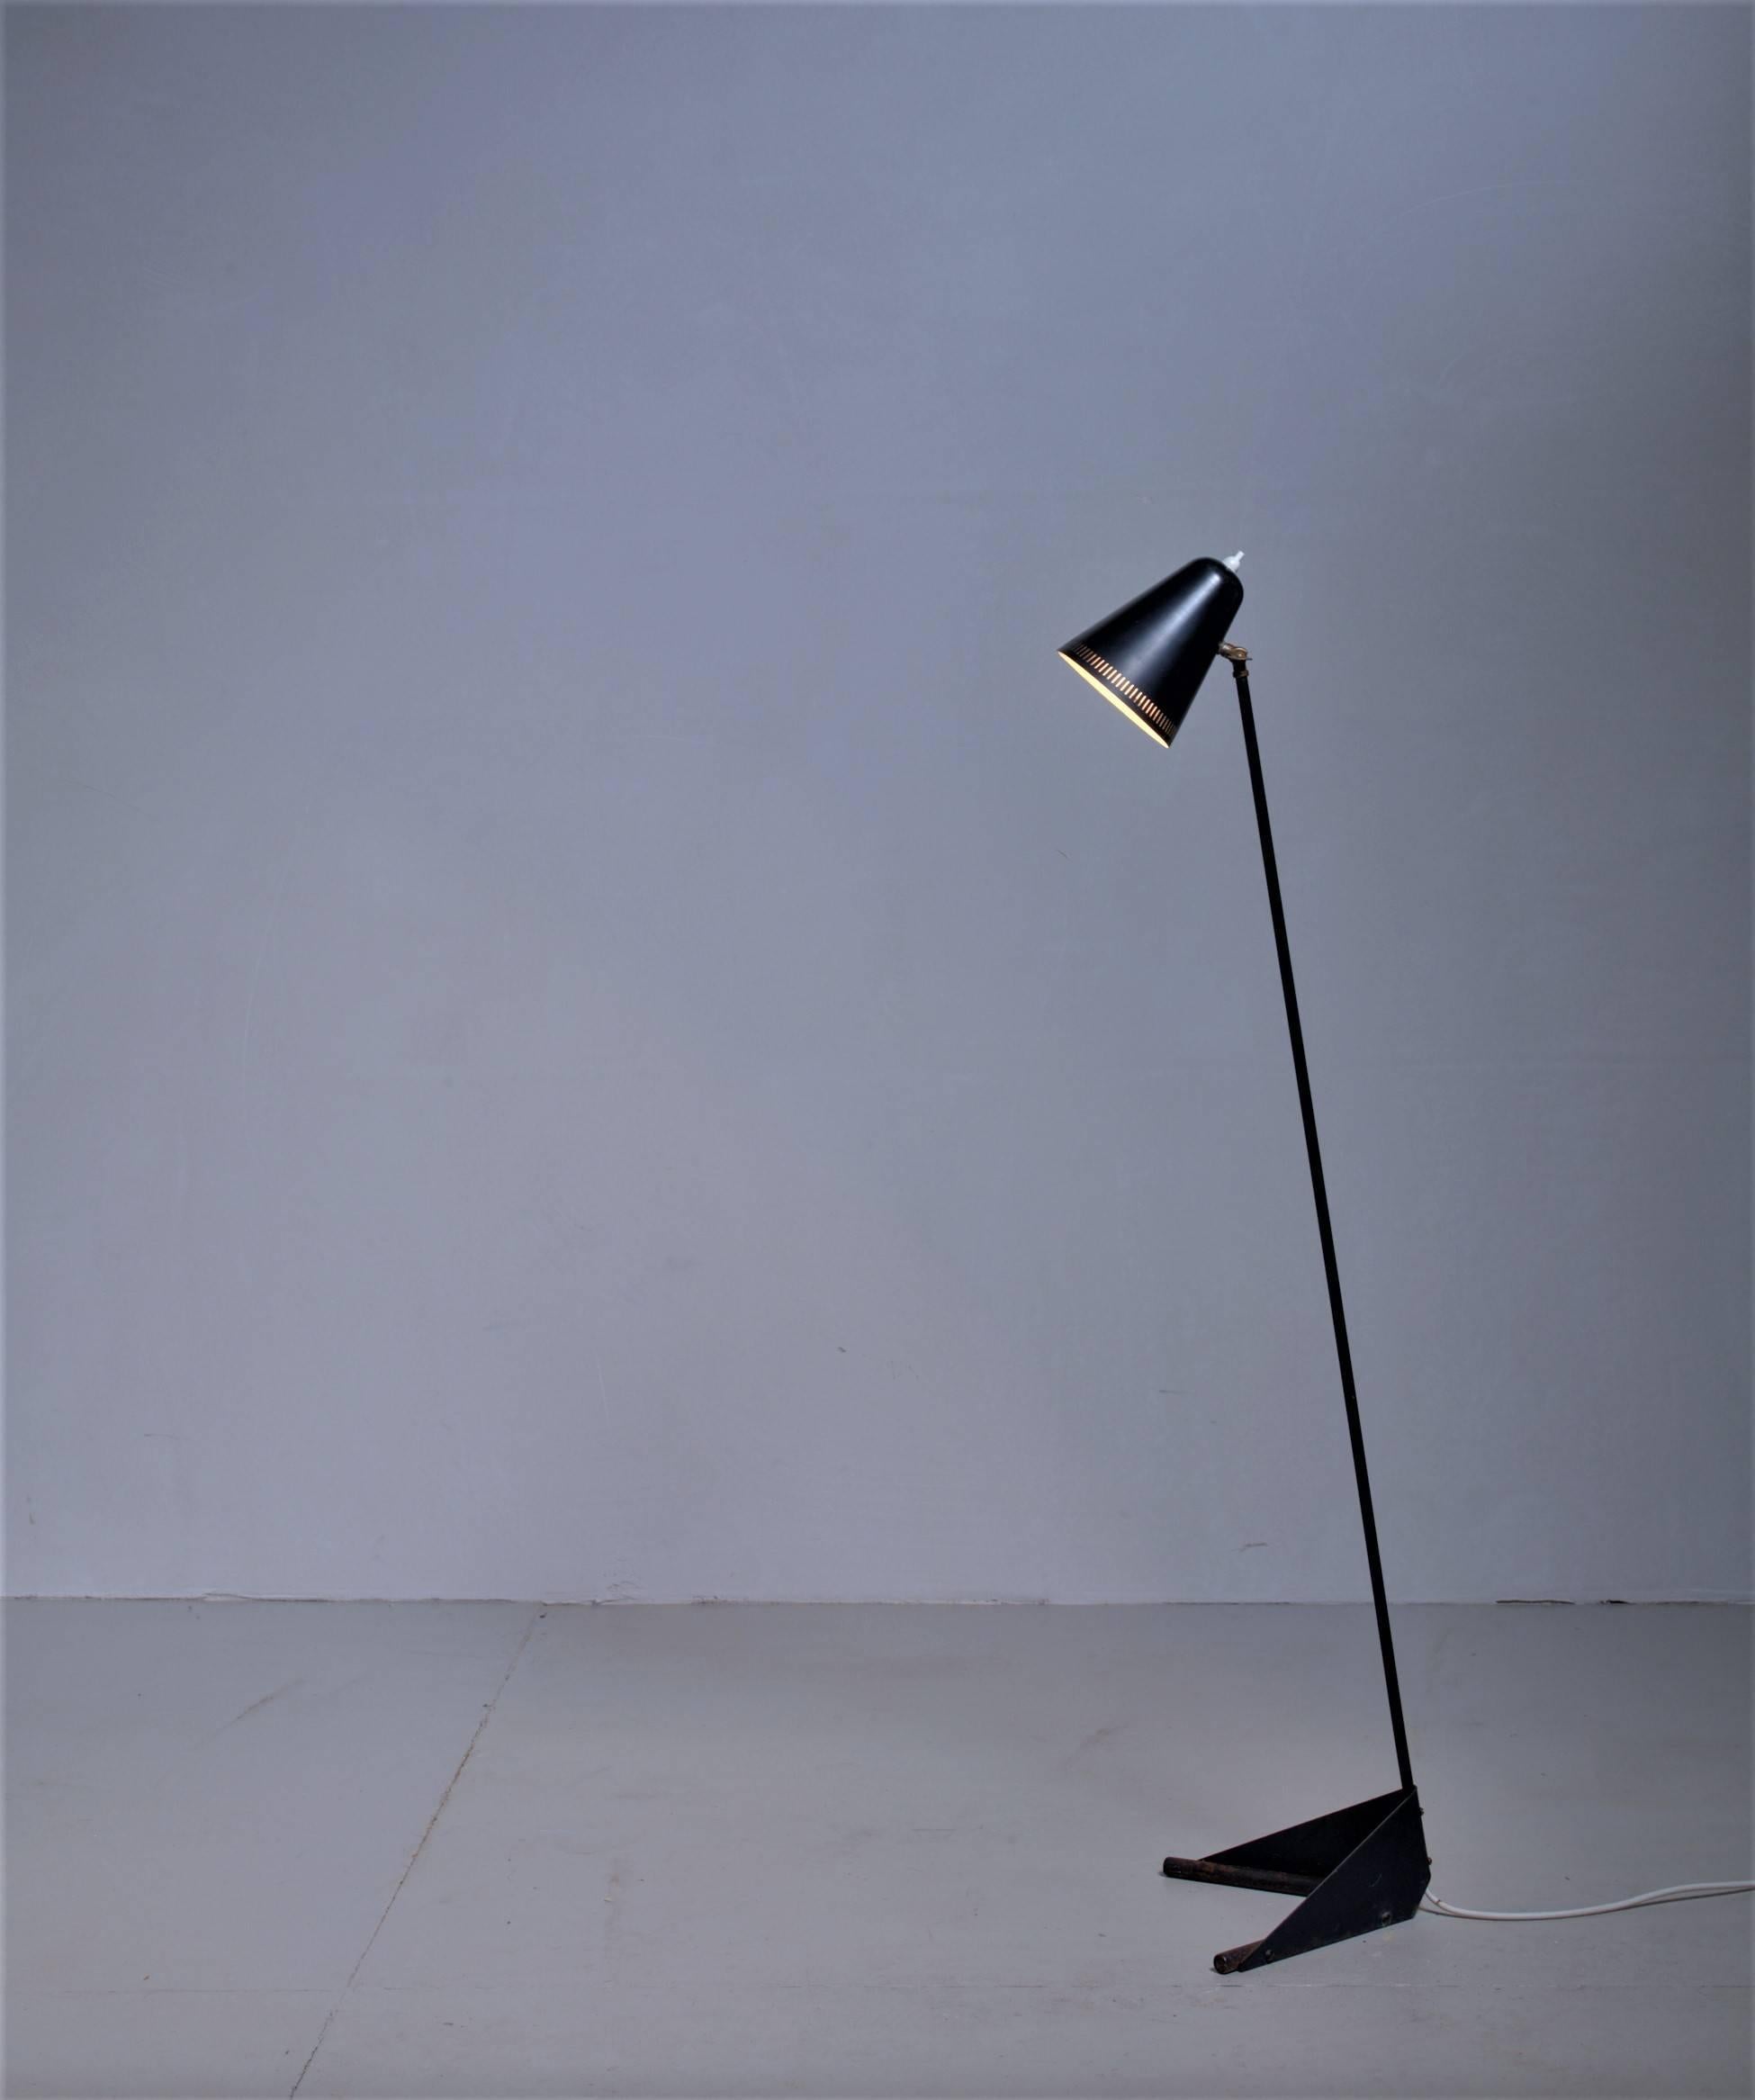 A Mid-Century floor lamp from Denmark, attributed to Svend Aage Holm Sørensen. The lamp is made of black lacquered metal and has a crow's foot and an adjustable hood.

* This piece is offered to you by Bloomberry, Amsterdam *